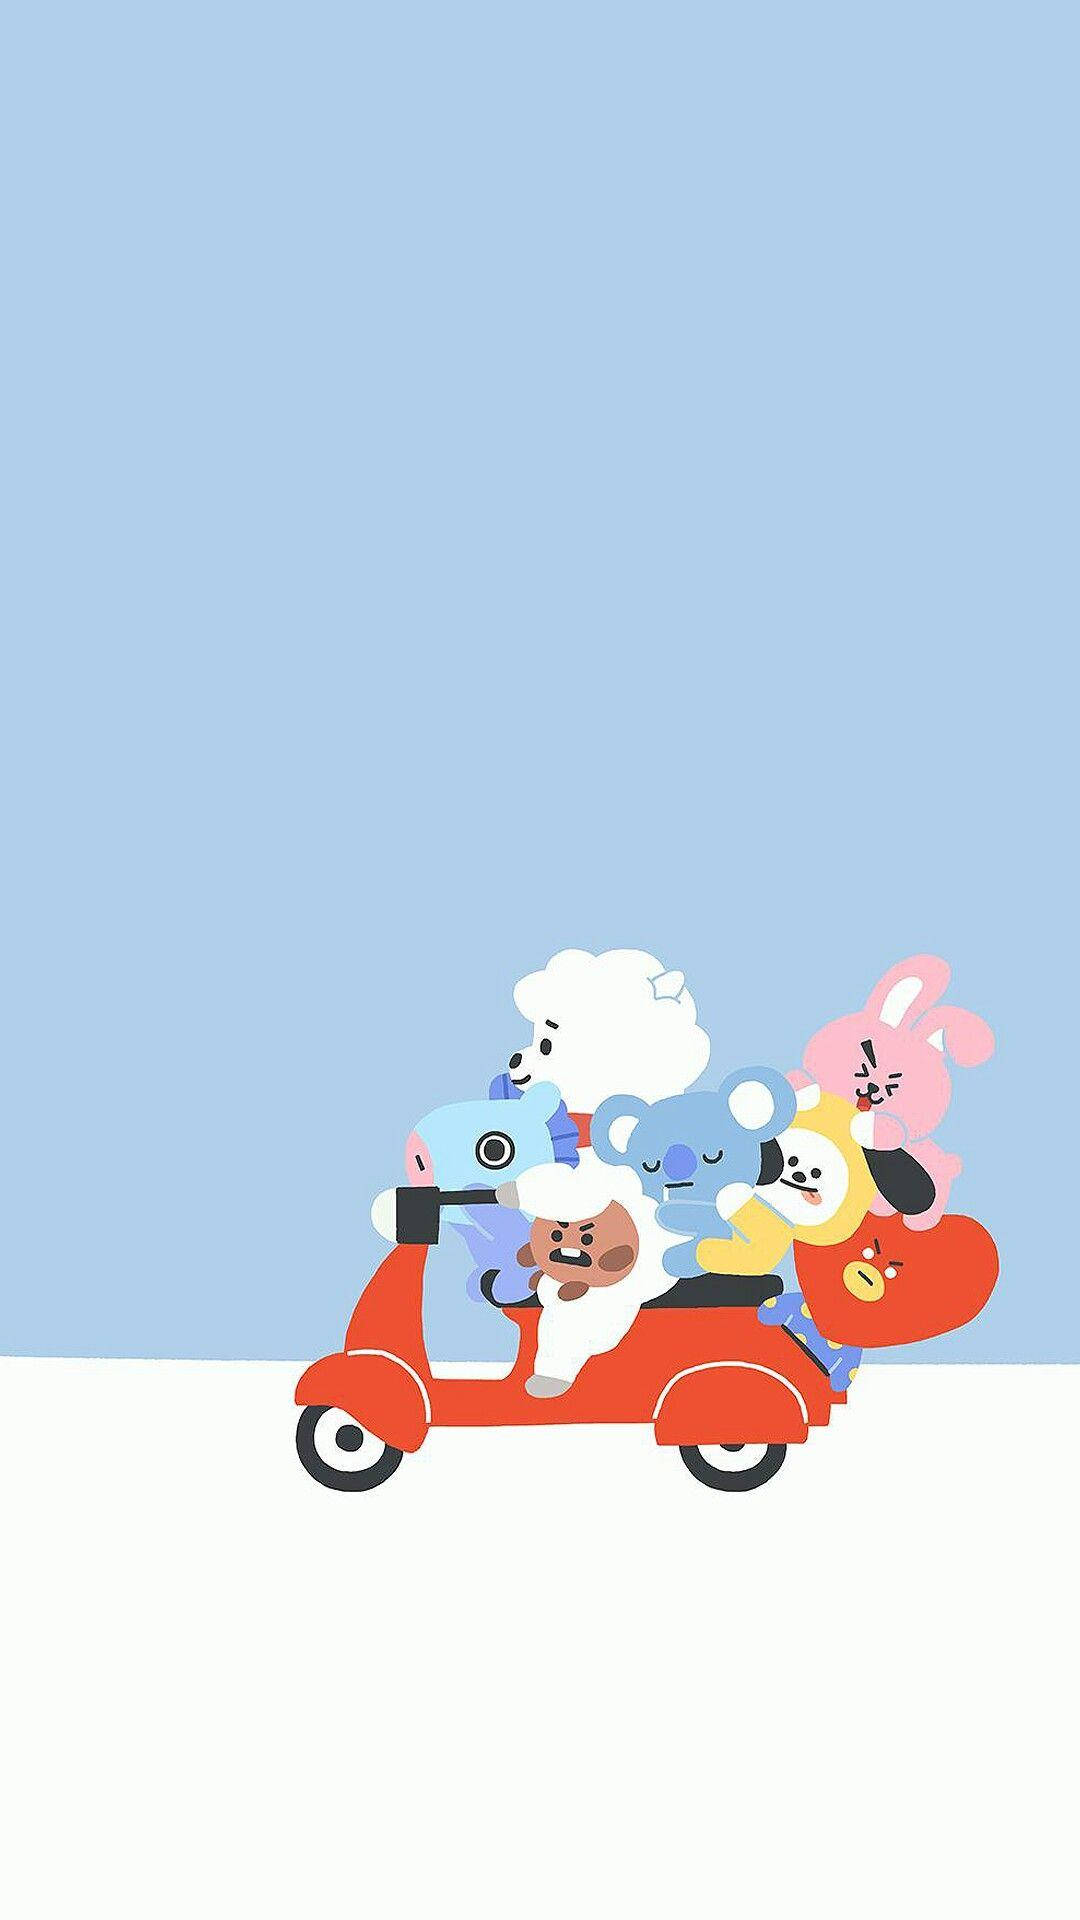 Cooky Bt21 In Scooter With Friends Wallpaper